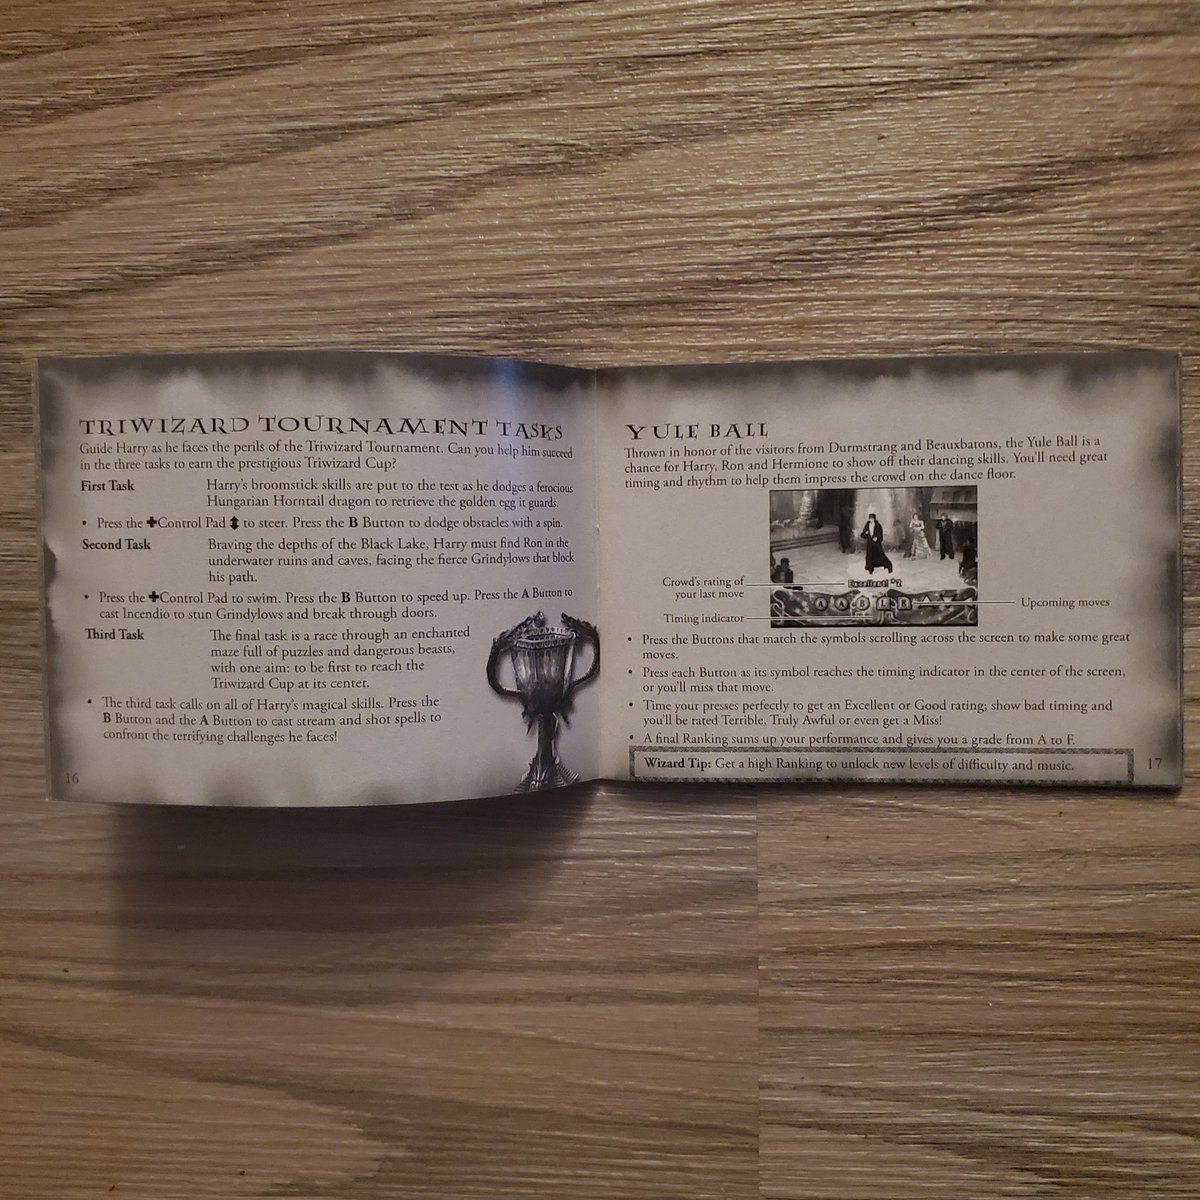 Instruction Manual Monday
Harry Potter and the Goblet of Fire 
#instructionmanualmonday #Nintendo #gameboyadvance #gba #gameboyadvancesp #gbasp #gameboymicro #harrypotter #gobletoffire #harrypotterandthegobletoffire #hermoinegranger #ronweasley #triwizardtournament #cedricdiggory